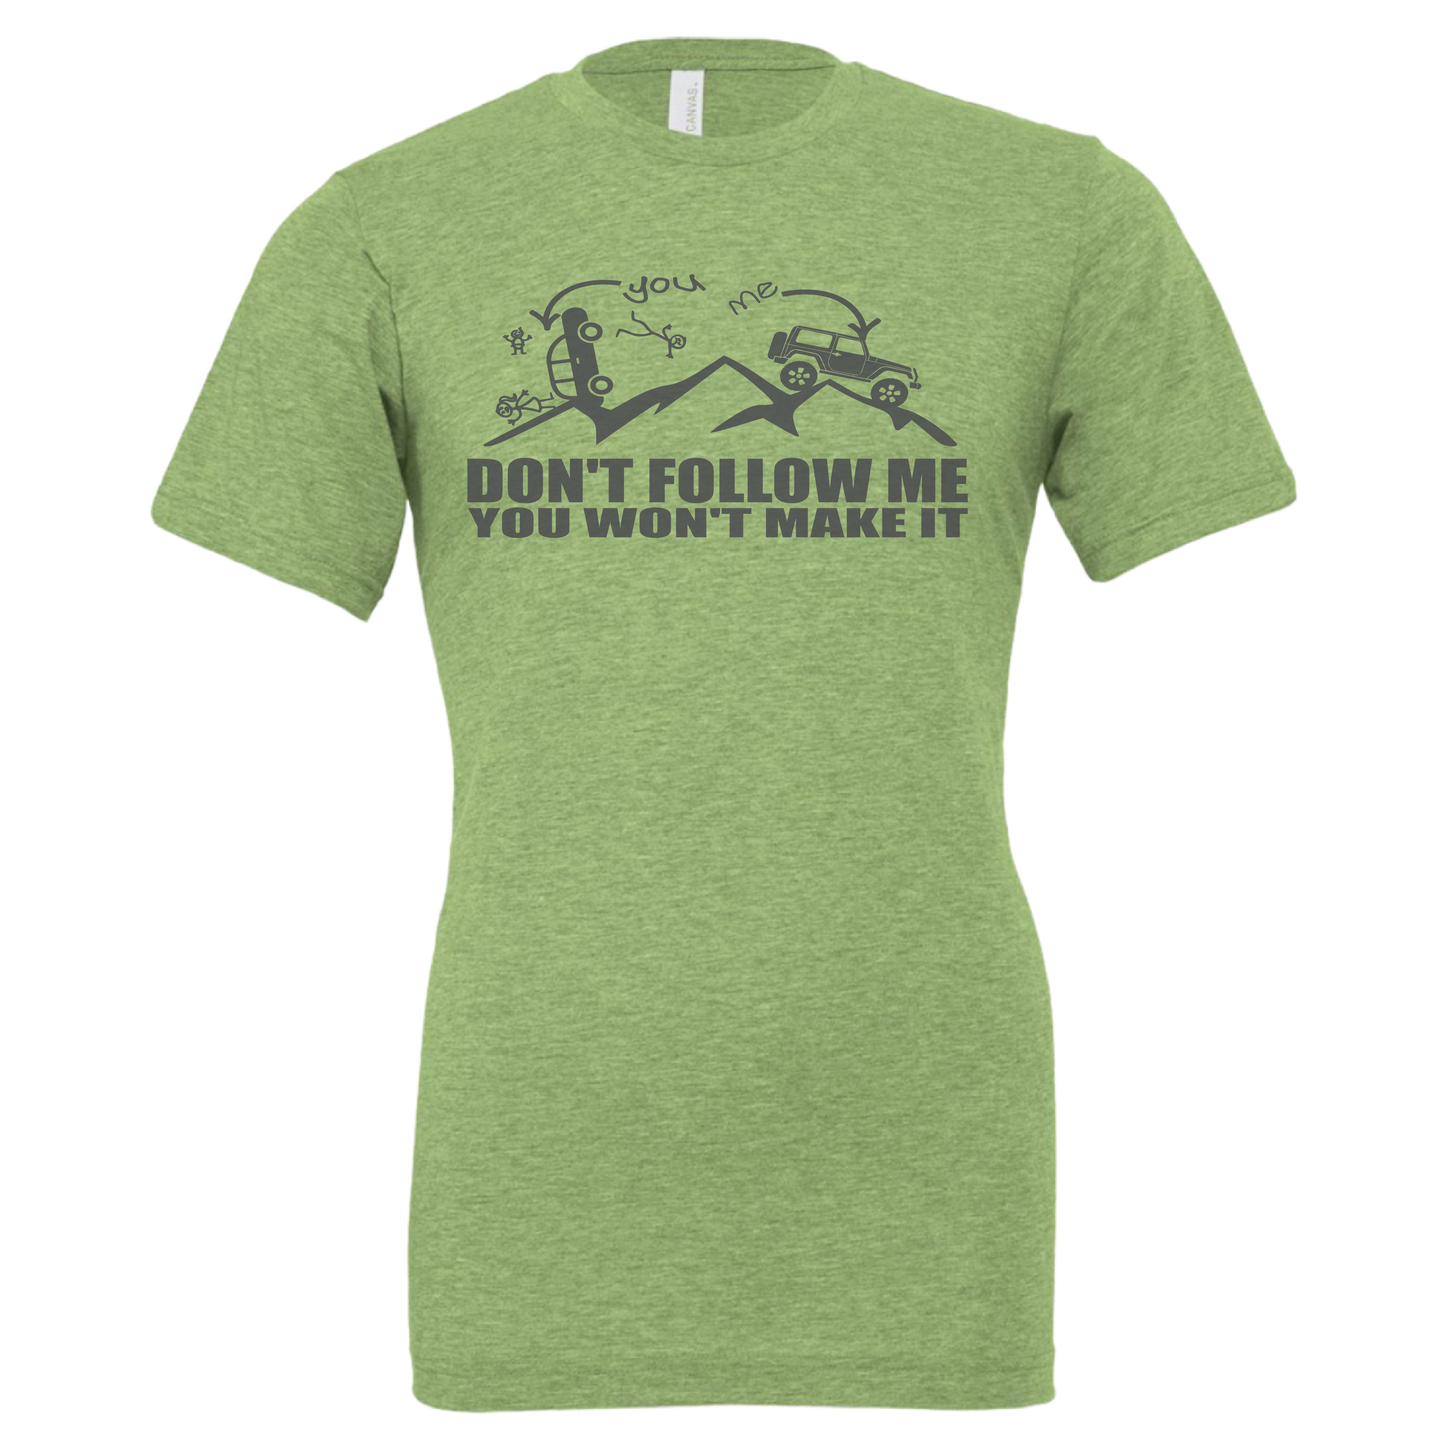 Won't Make It - Shirt, Tank Top, Long Sleeve or Hoodie - Available in Multiple Colors